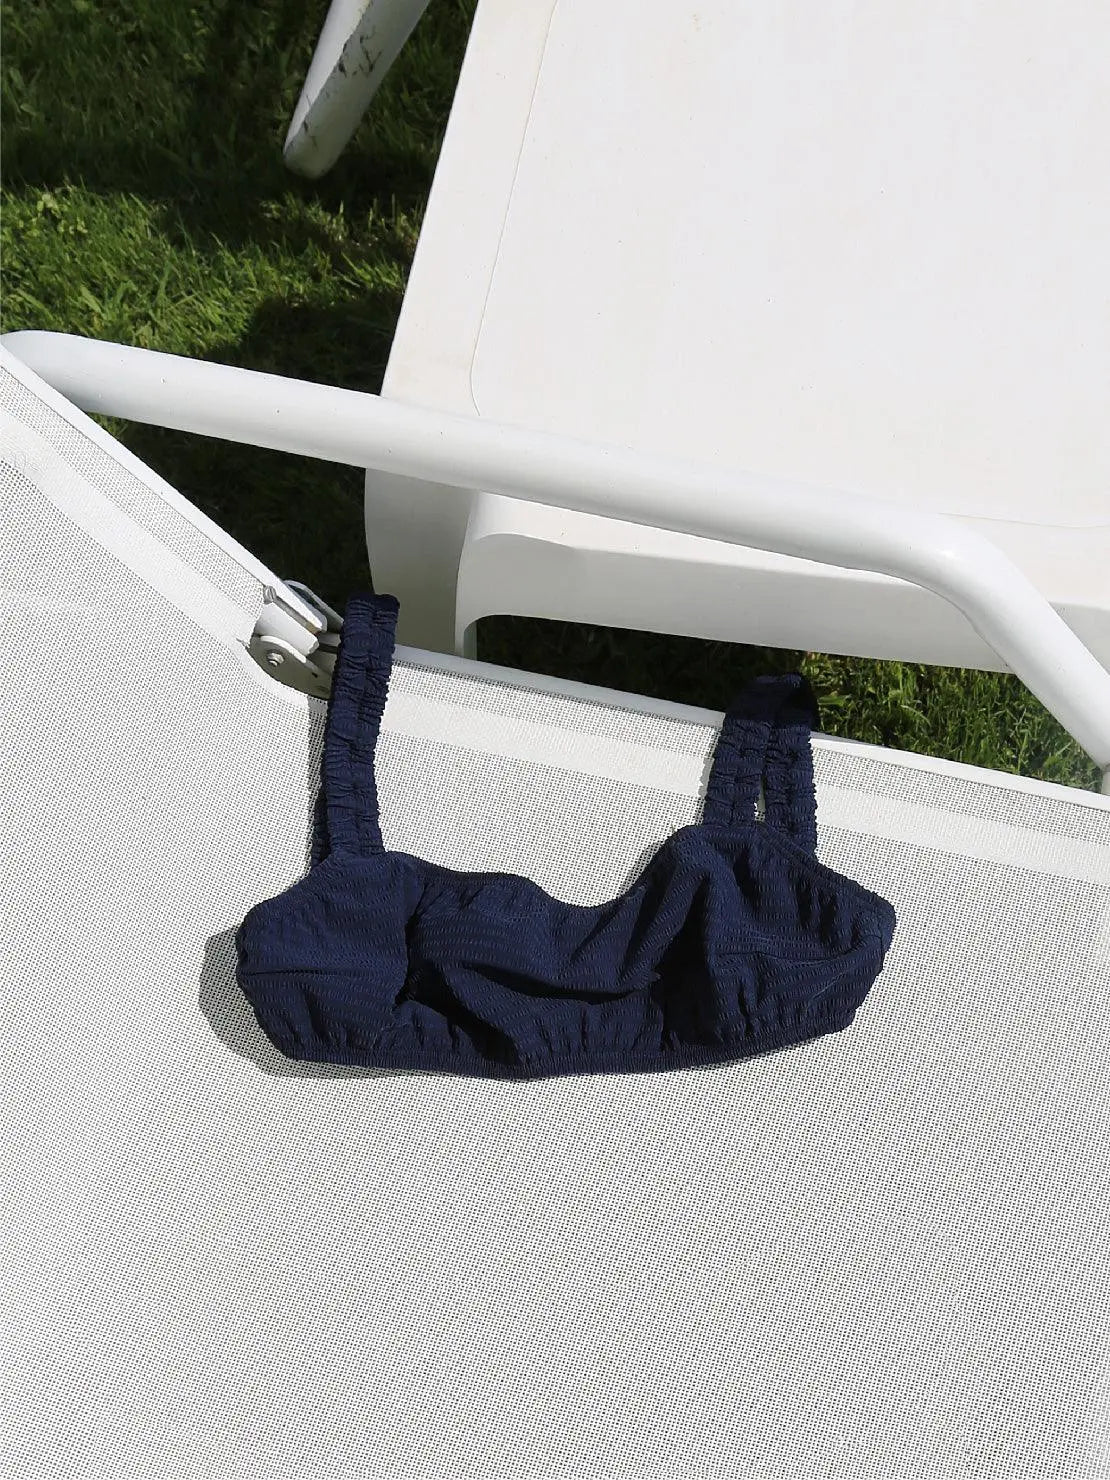 A Marine Bikini Top - Bassal from Bassal is placed on a white lounge chair outside on a sunny day. The lounge chair is positioned on green grass, perfect for soaking up the Barcelona sun.